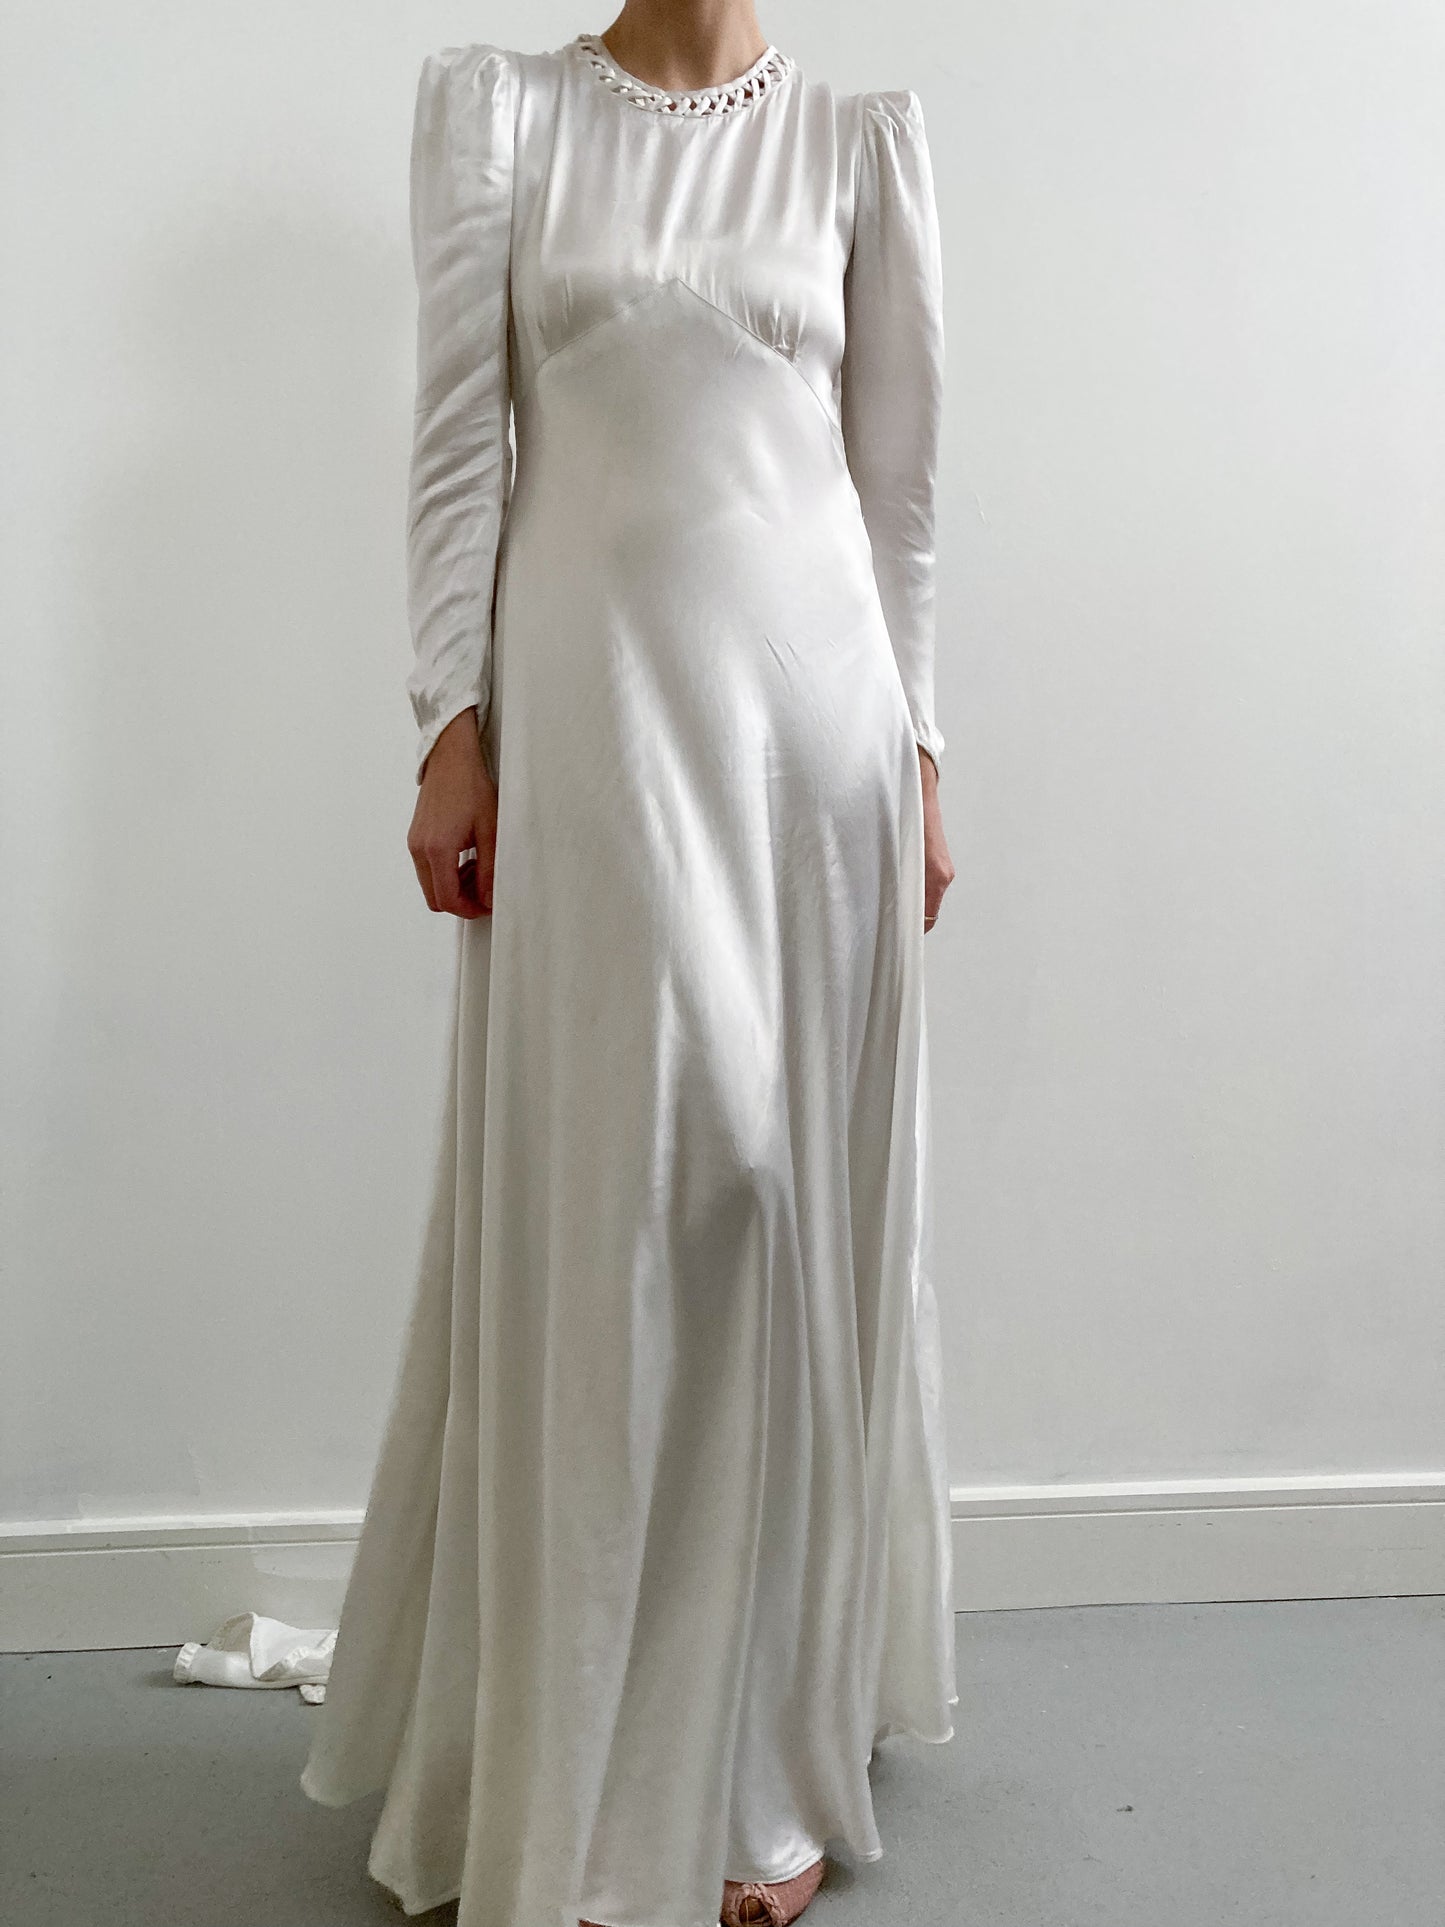 1940s Satin Charmeuse Wedding Dress with Pleated Detail and Train